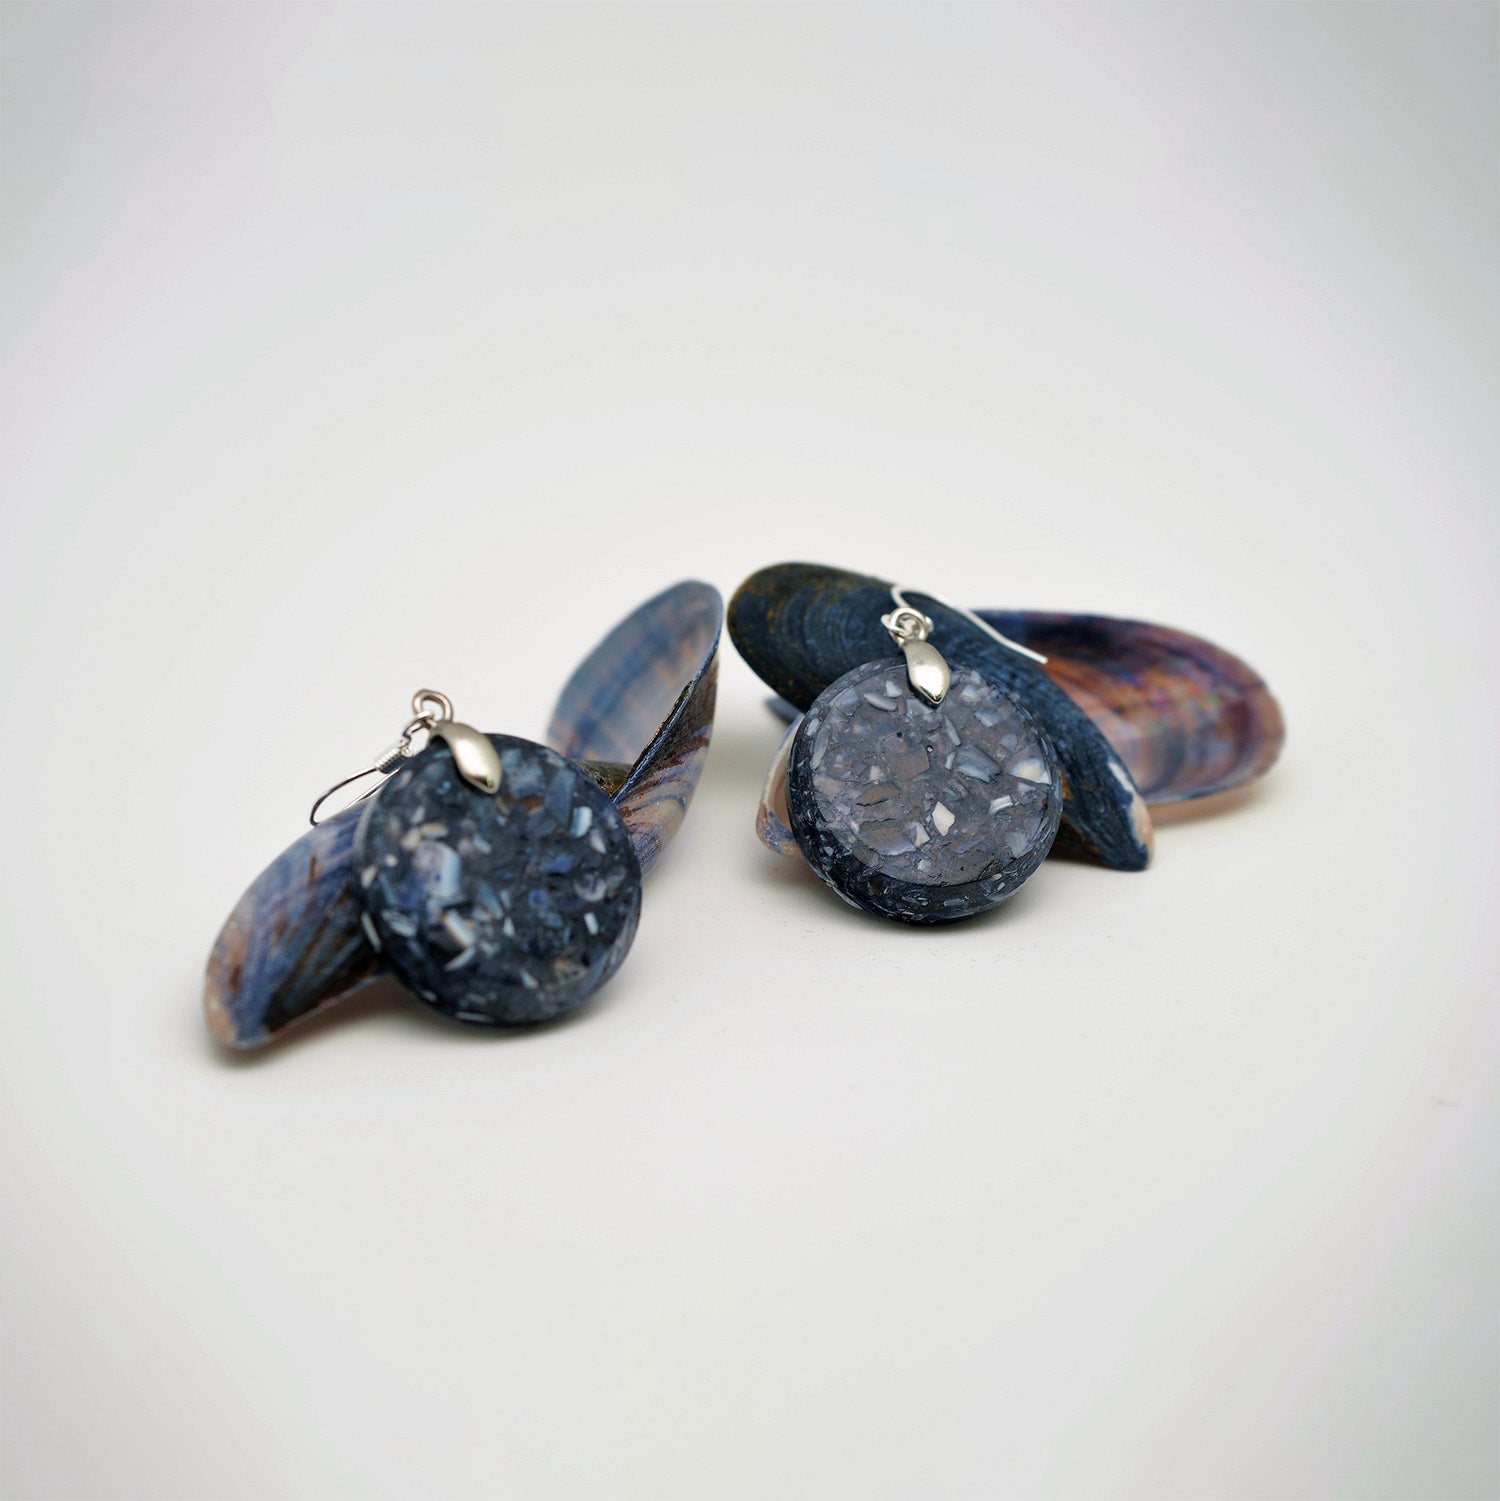 Round earrings made from recycled mussel shells